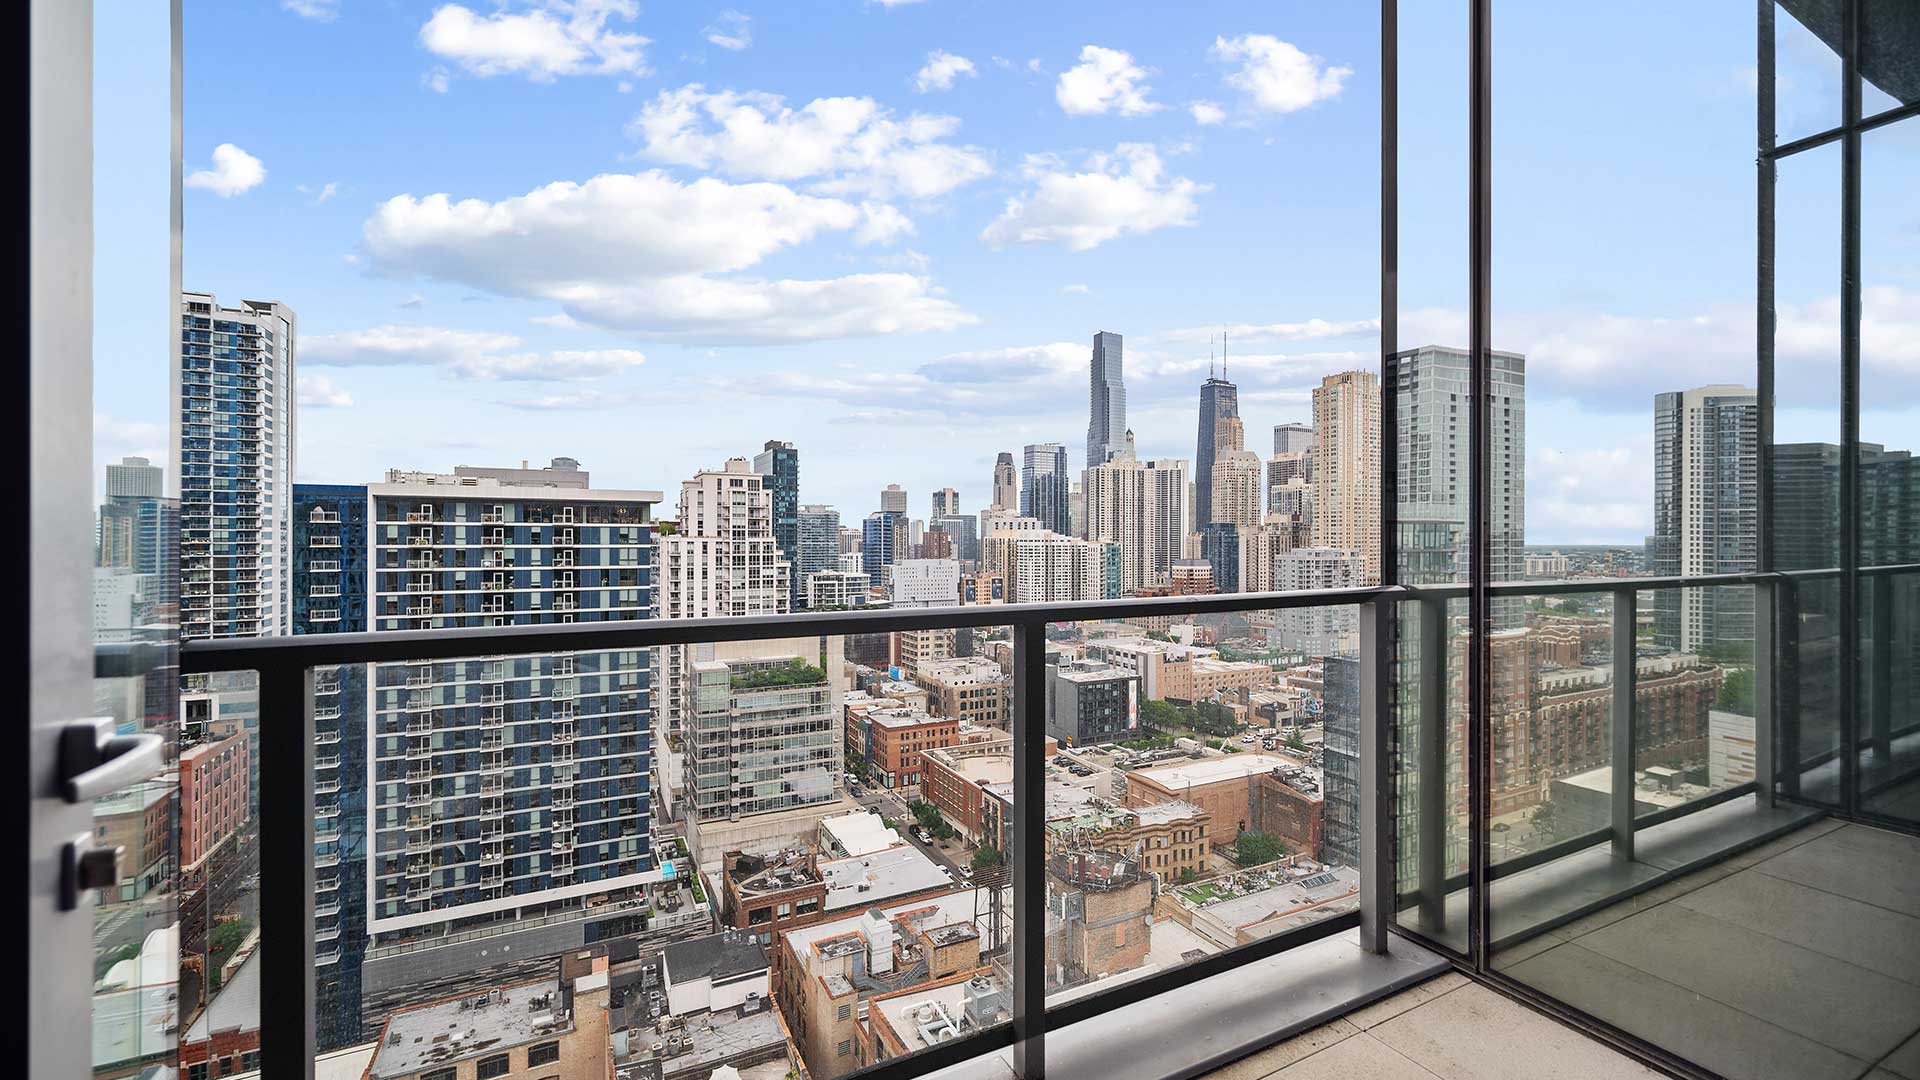 Looking out at the Chicago skyline from a residence balcony. There is a glass railing at the edge and a floor-to-ceiling window on the right.